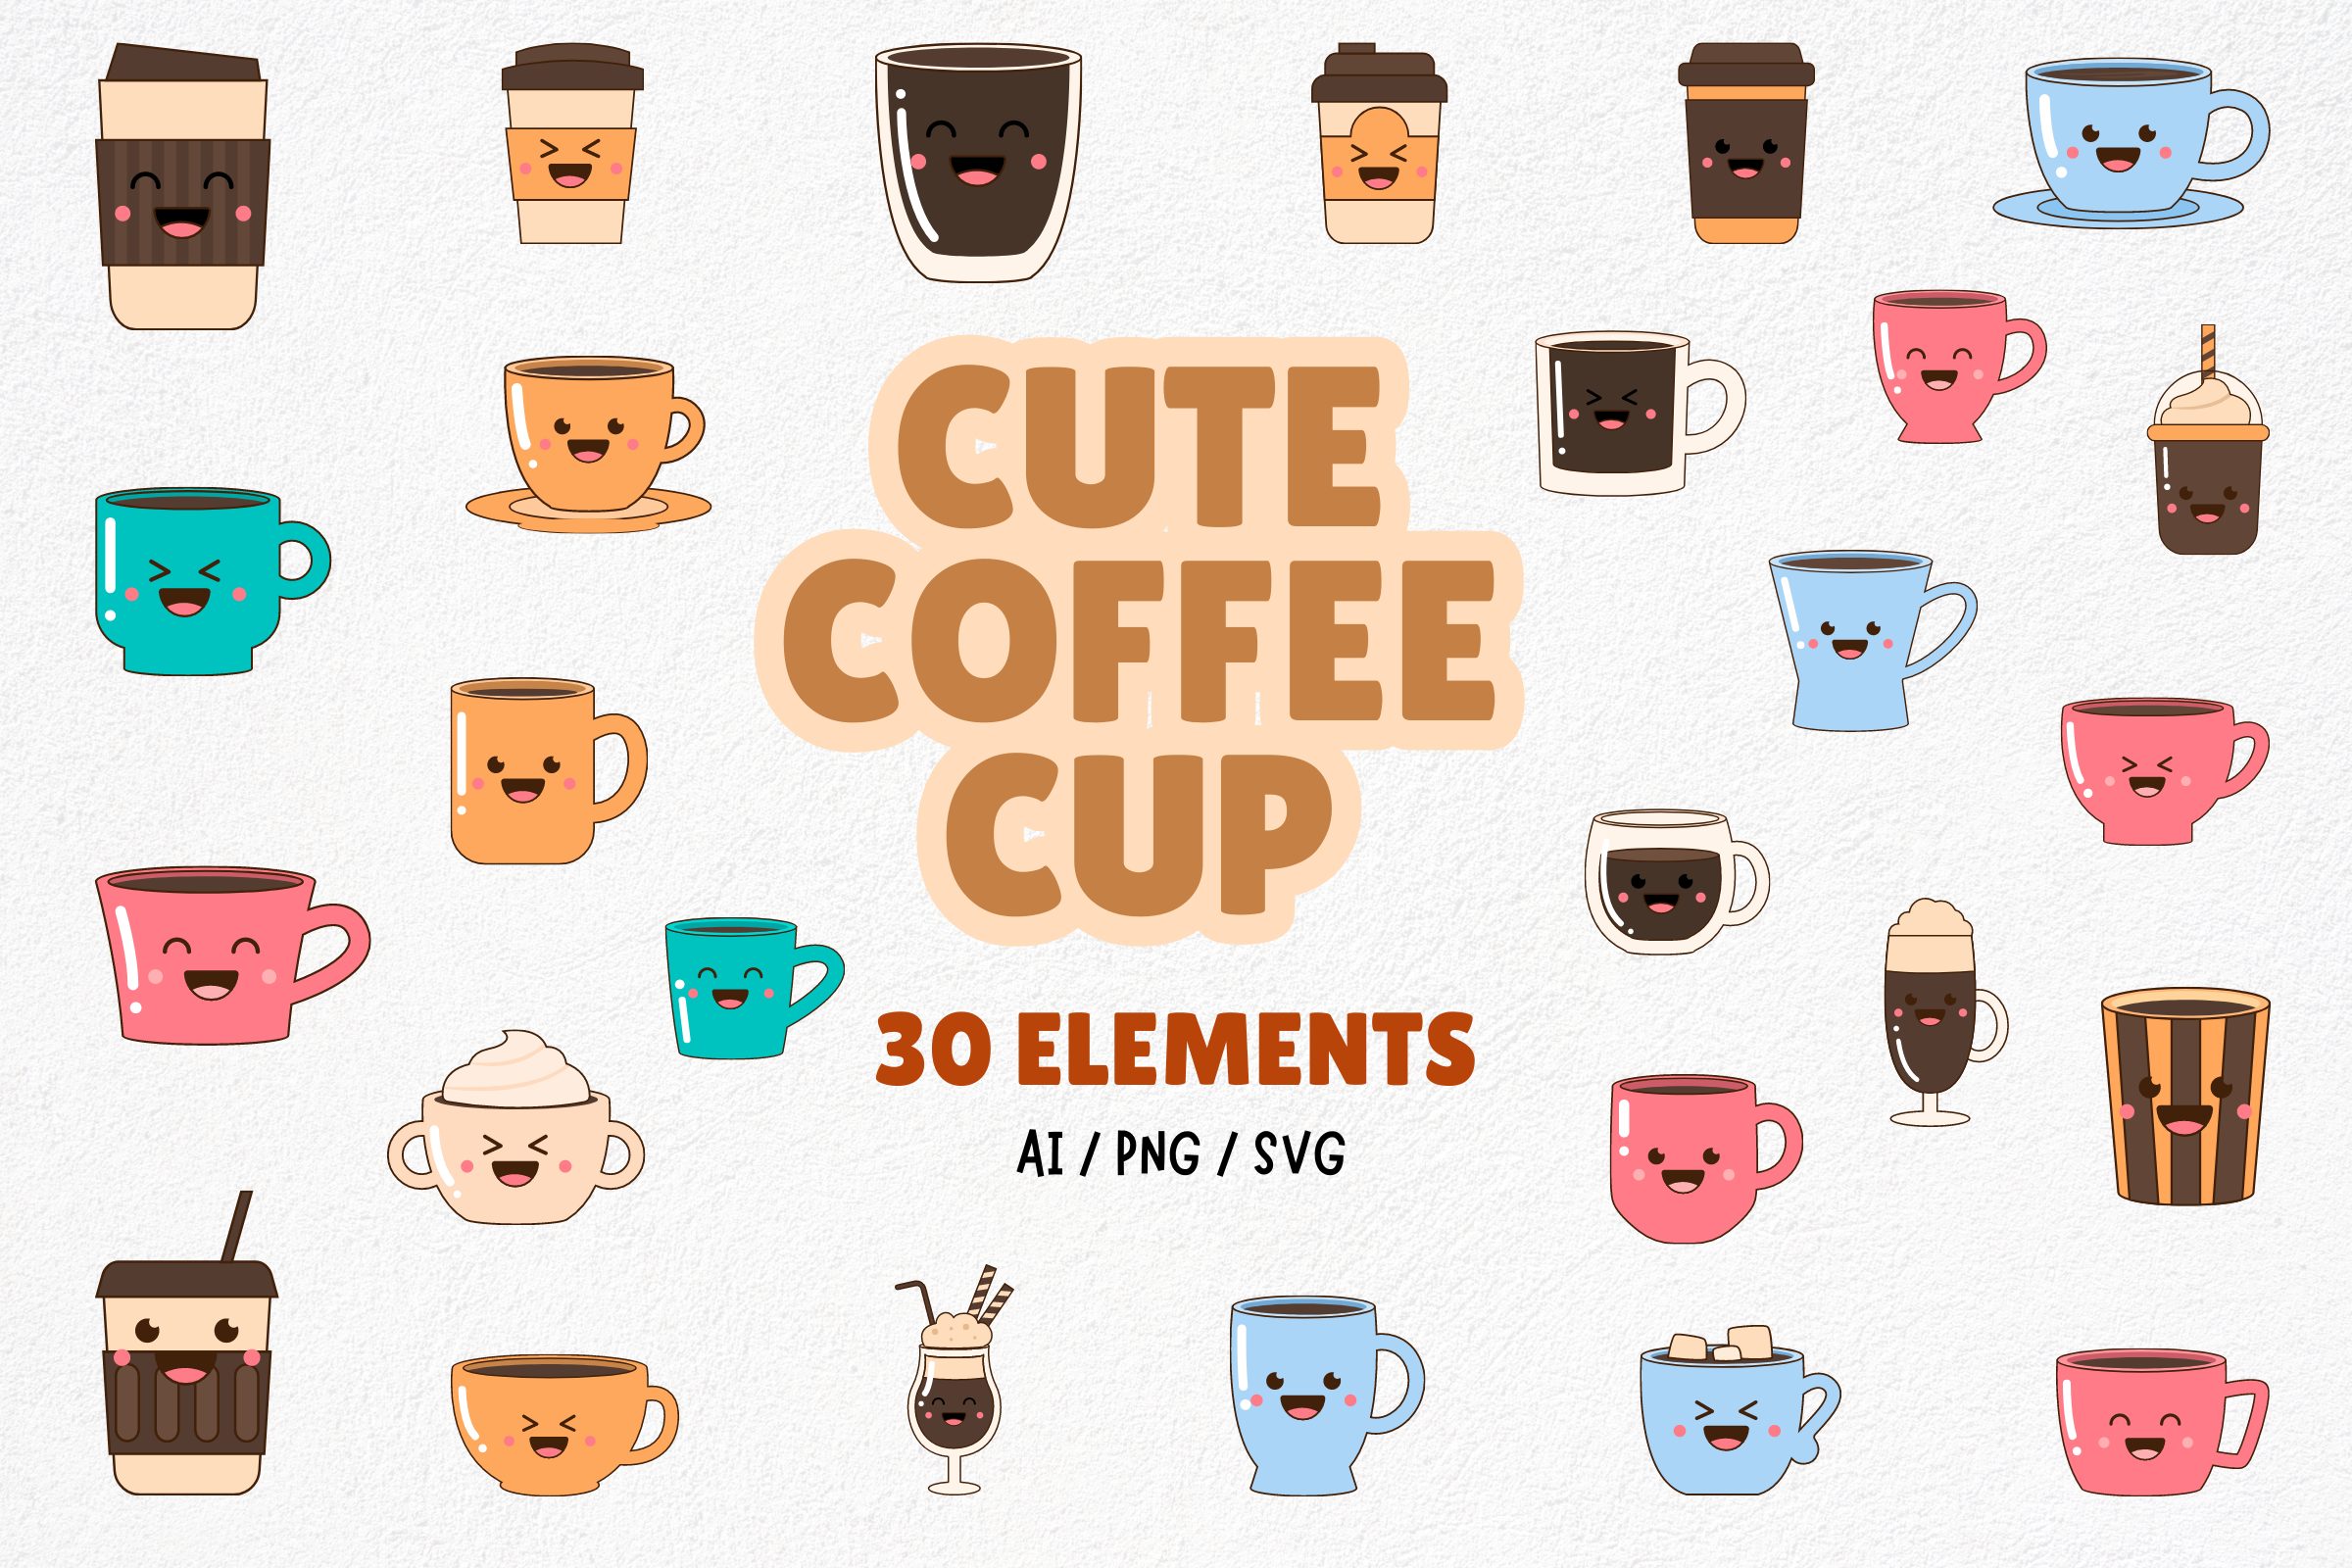 https://www.creativefabrica.com/wp-content/uploads/2023/05/30/Cute-Coffee-Cup-Illustration-Graphics-70912196-1.png